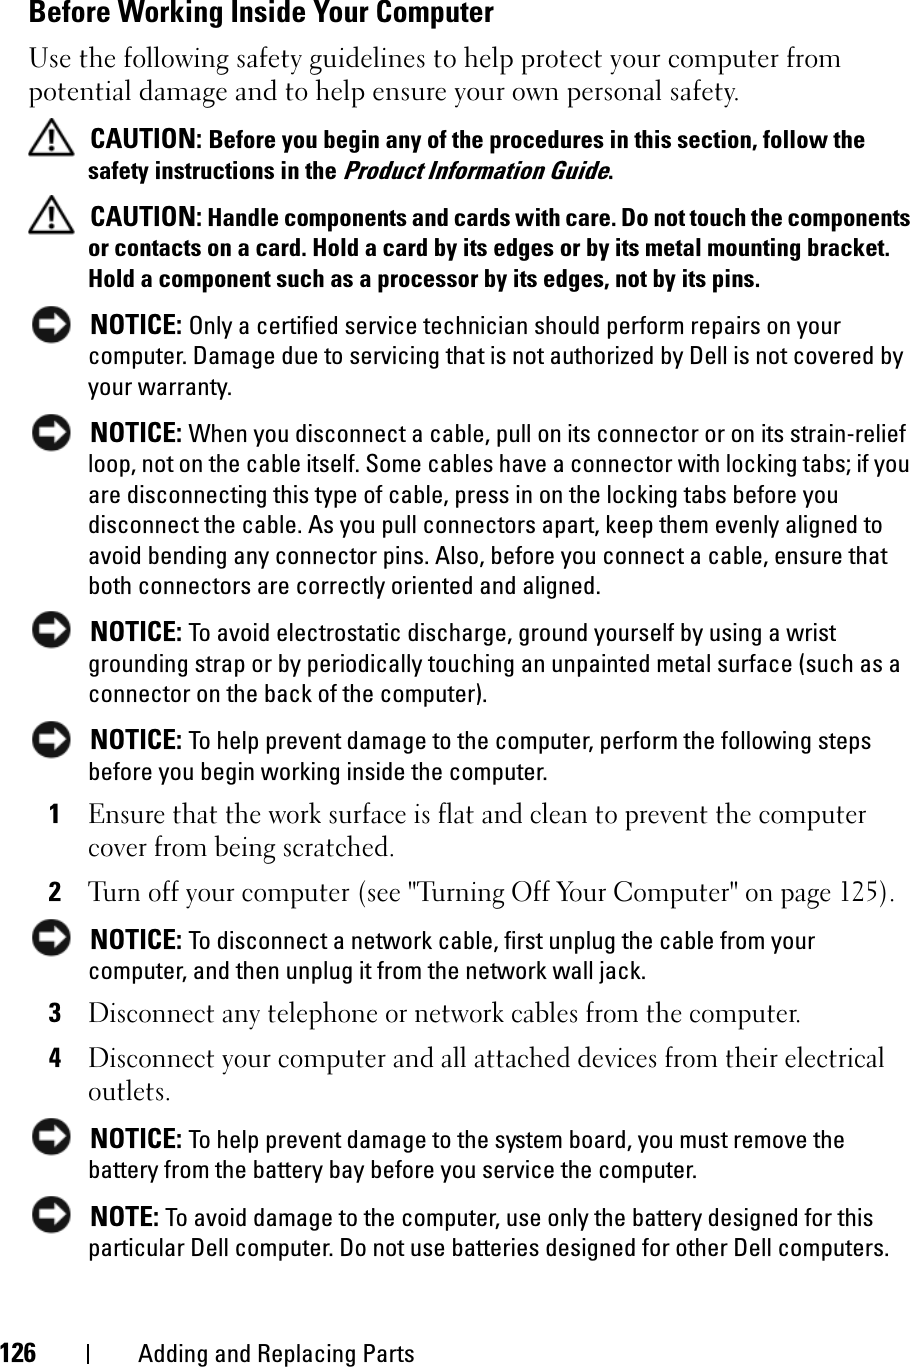 126 Adding and Replacing PartsBefore Working Inside Your ComputerUse the following safety guidelines to help protect your computer from potential damage and to help ensure your own personal safety.CAUTION: Before you begin any of the procedures in this section, follow the safety instructions in the Product Information Guide.CAUTION: Handle components and cards with care. Do not touch the components or contacts on a card. Hold a card by its edges or by its metal mounting bracket. Hold a component such as a processor by its edges, not by its pins.NOTICE: Only a certified service technician should perform repairs on your computer. Damage due to servicing that is not authorized by Dell is not covered by your warranty.NOTICE: When you disconnect a cable, pull on its connector or on its strain-relief loop, not on the cable itself. Some cables have a connector with locking tabs; if you are disconnecting this type of cable, press in on the locking tabs before you disconnect the cable. As you pull connectors apart, keep them evenly aligned to avoid bending any connector pins. Also, before you connect a cable, ensure that both connectors are correctly oriented and aligned. NOTICE: To avoid electrostatic discharge, ground yourself by using a wrist grounding strap or by periodically touching an unpainted metal surface (such as a connector on the back of the computer).NOTICE: To help prevent damage to the computer, perform the following steps before you begin working inside the computer. 1Ensure that the work surface is flat and clean to prevent the computer cover from being scratched.2Turn off your computer (see &quot;Turning Off Your Computer&quot; on page 125).NOTICE: To disconnect a network cable, first unplug the cable from your computer, and then unplug it from the network wall jack.3Disconnect any telephone or network cables from the computer.4Disconnect your computer and all attached devices from their electrical outlets.NOTICE: To help prevent damage to the system board, you must remove the battery from the battery bay before you service the computer. NOTE: To avoid damage to the computer, use only the battery designed for this particular Dell computer. Do not use batteries designed for other Dell computers.